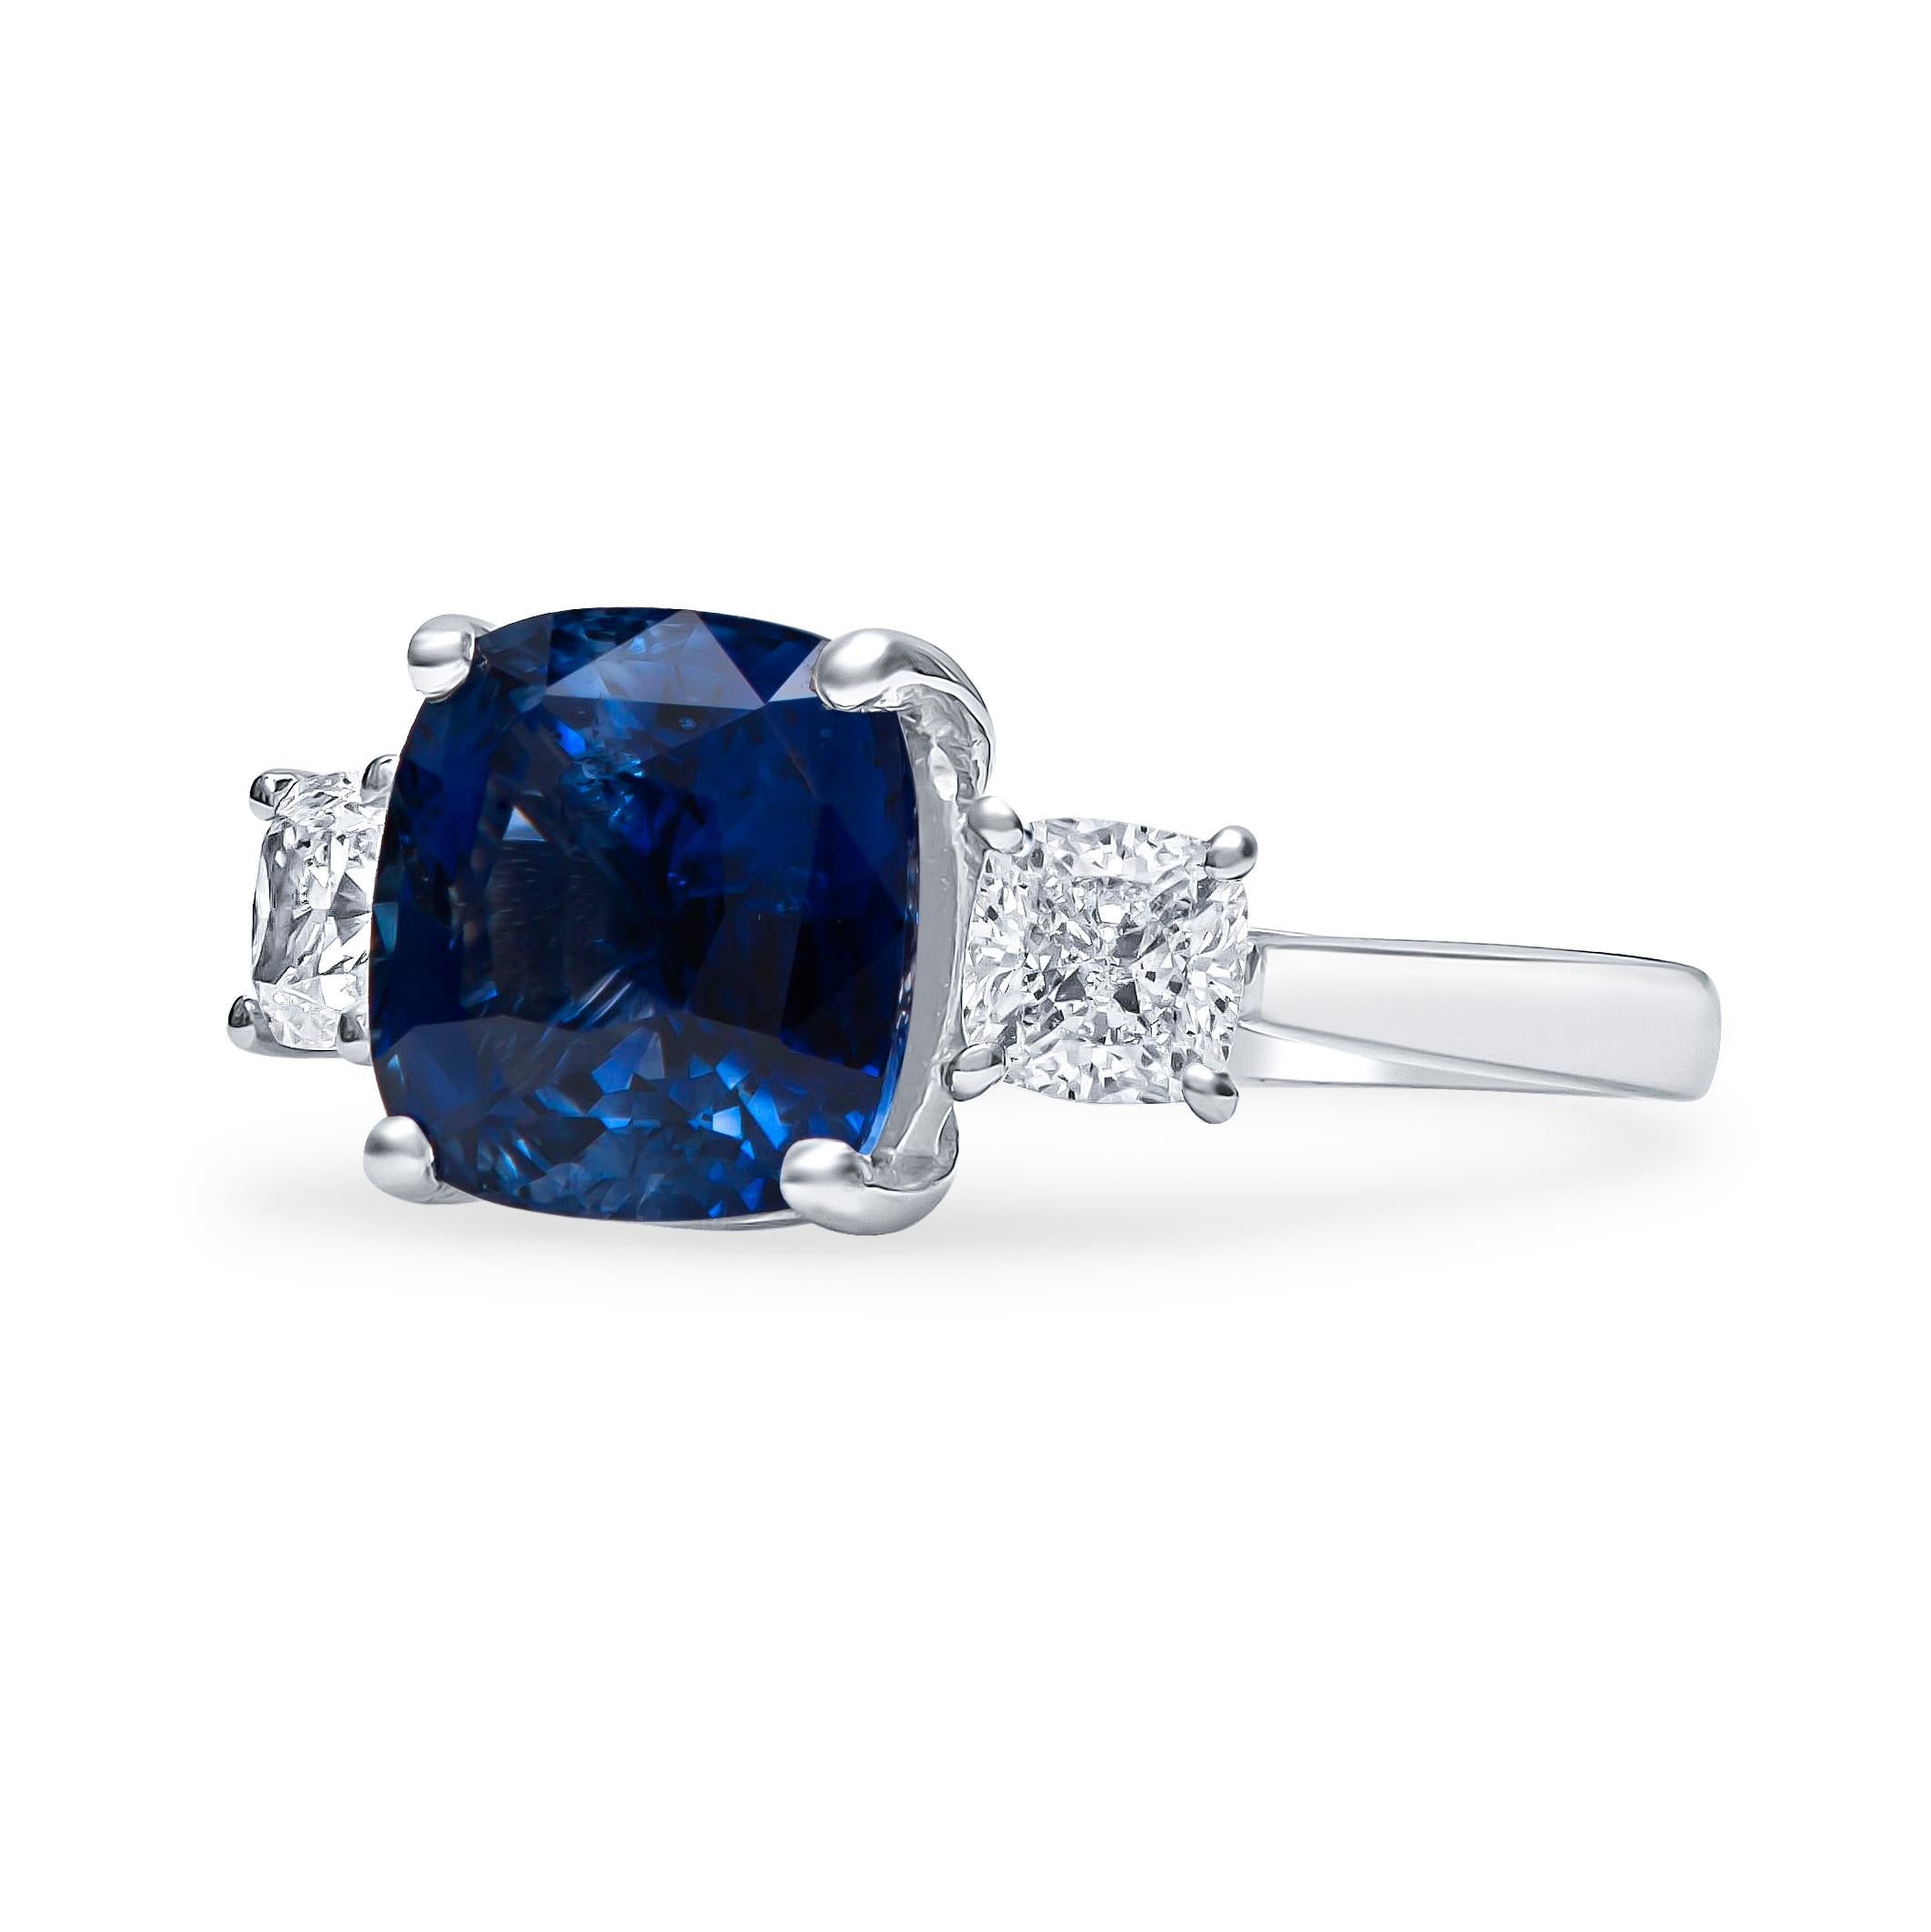 Captivating three-stone sapphire and diamond ring designed in platinum, showcasing a beautiful deep blue sapphire weighing 5.13 carats,  accompanied by two carefully selected and perfectly matched cushion cut diamonds weighing 1.02 carats total with